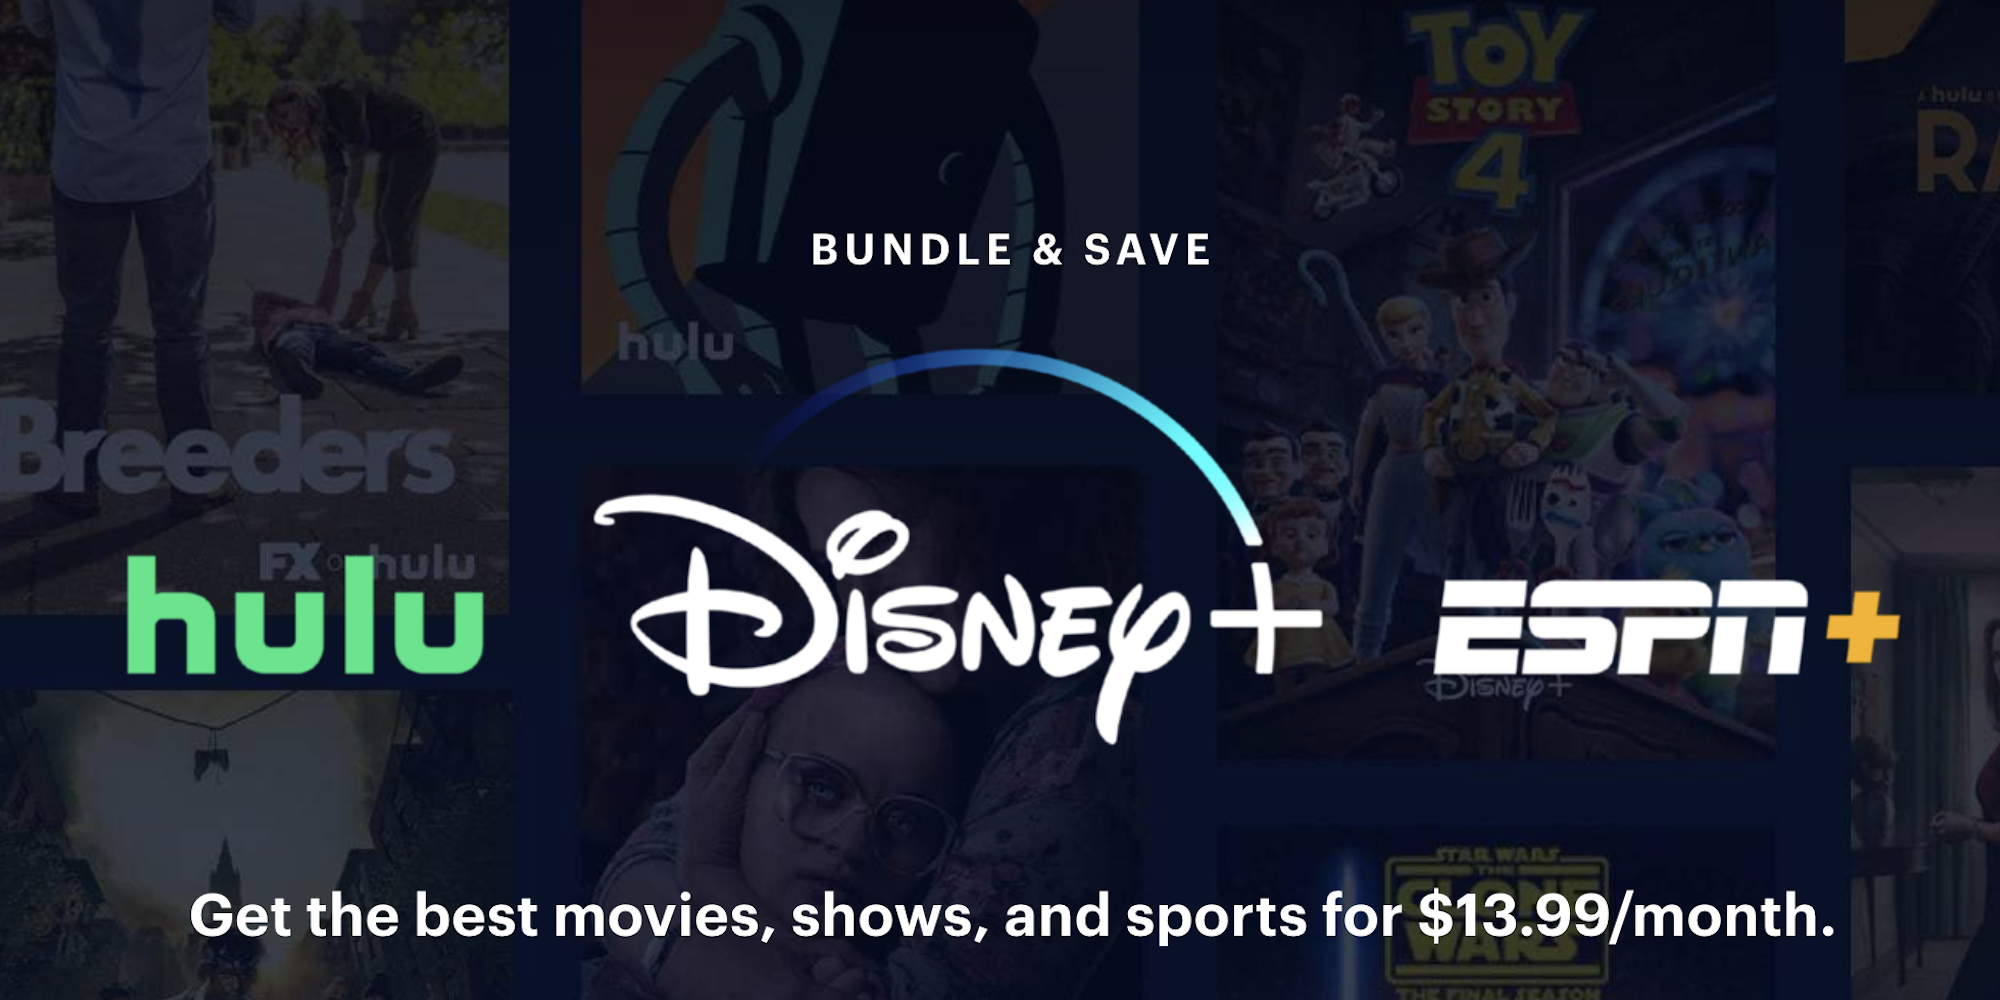 How to Get the Disney Plus, Hulu, and ESPN Plus Bundle